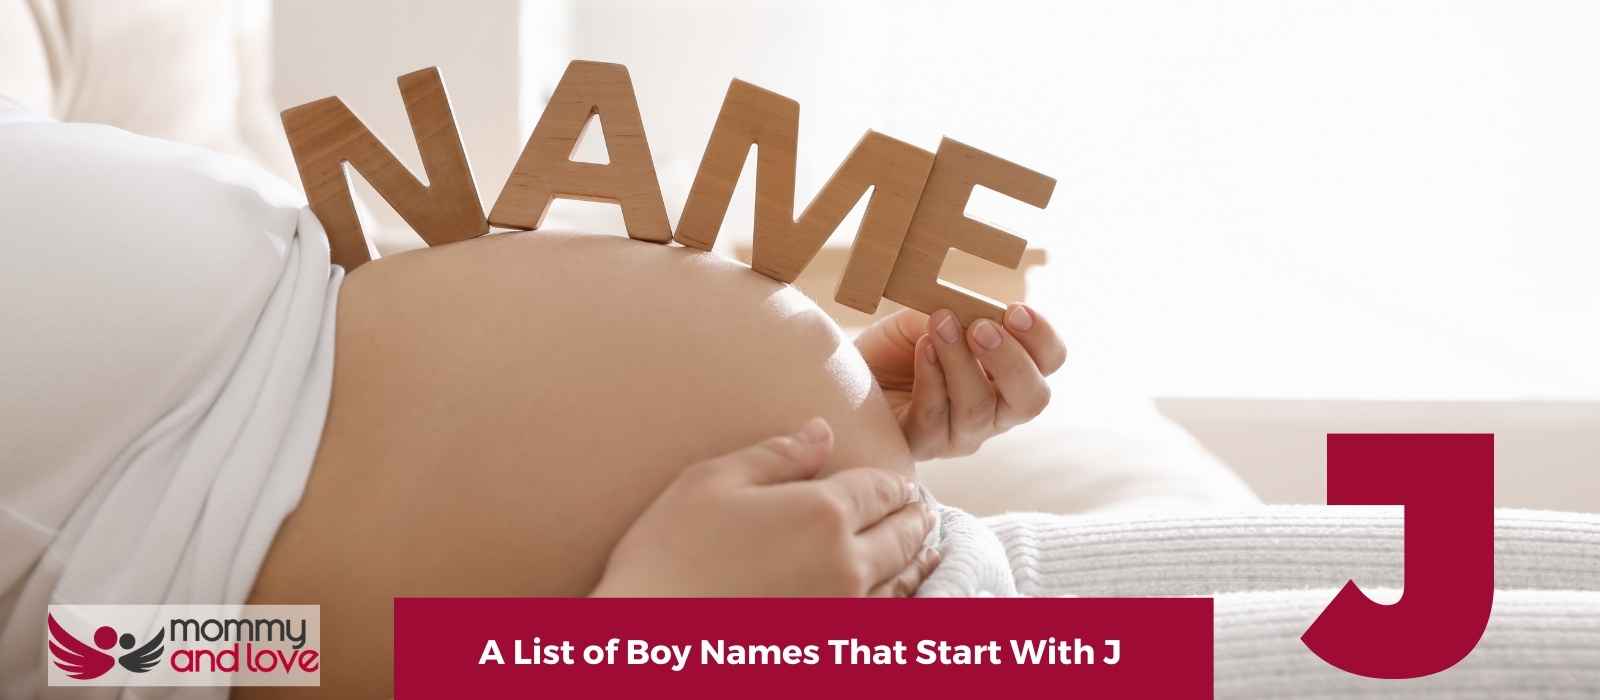 Discover the Perfect J Name for Your Little Guy with Our Ultimate List of 233 Boy Names!